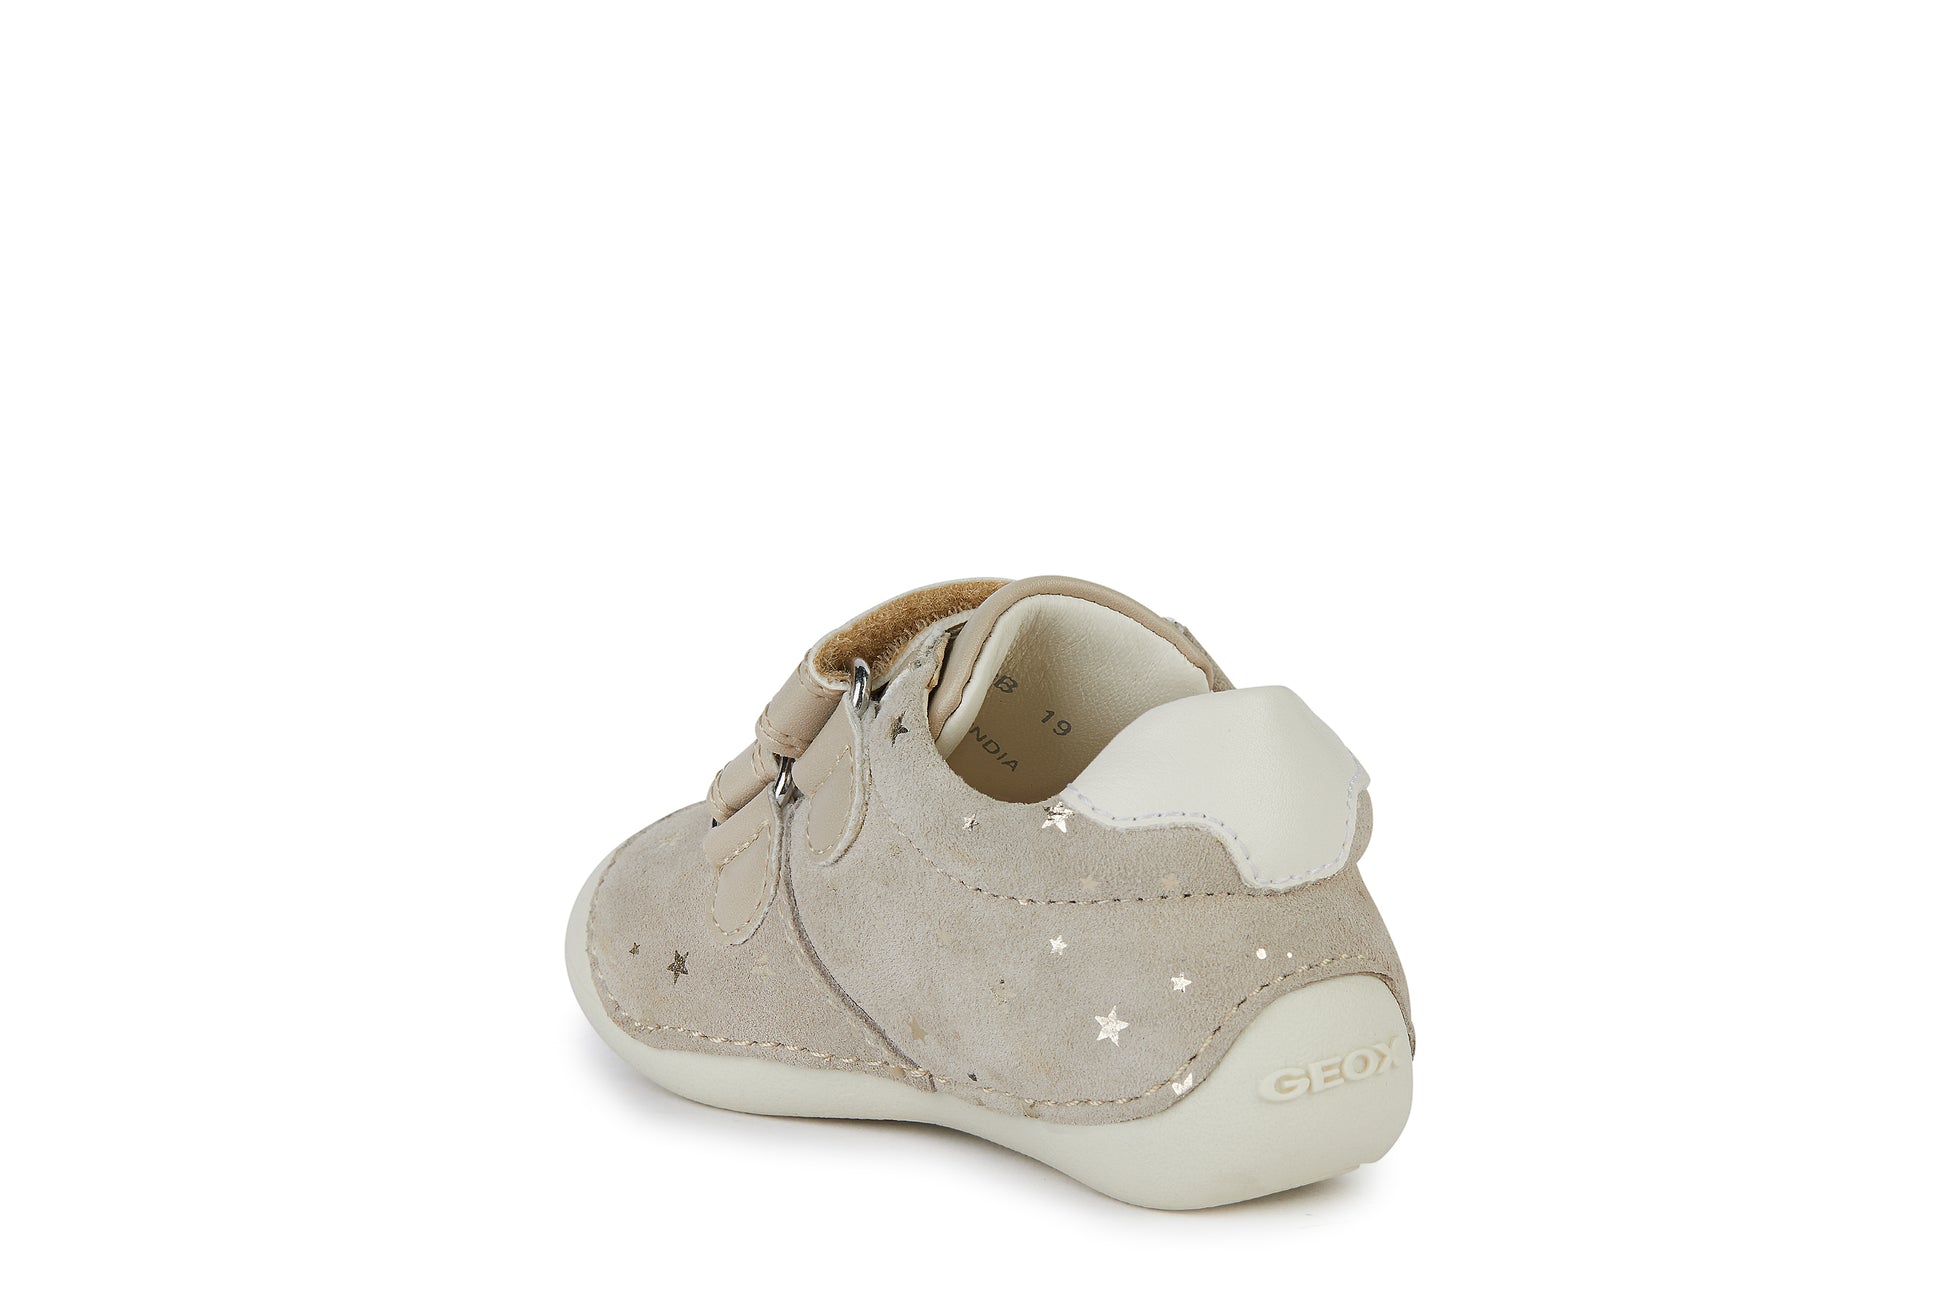 A girls pre walker by Geox, style B Tutim Girl, with toe bumper ,in beige suede with star detail and double velcro fastening. Angled view of left side.